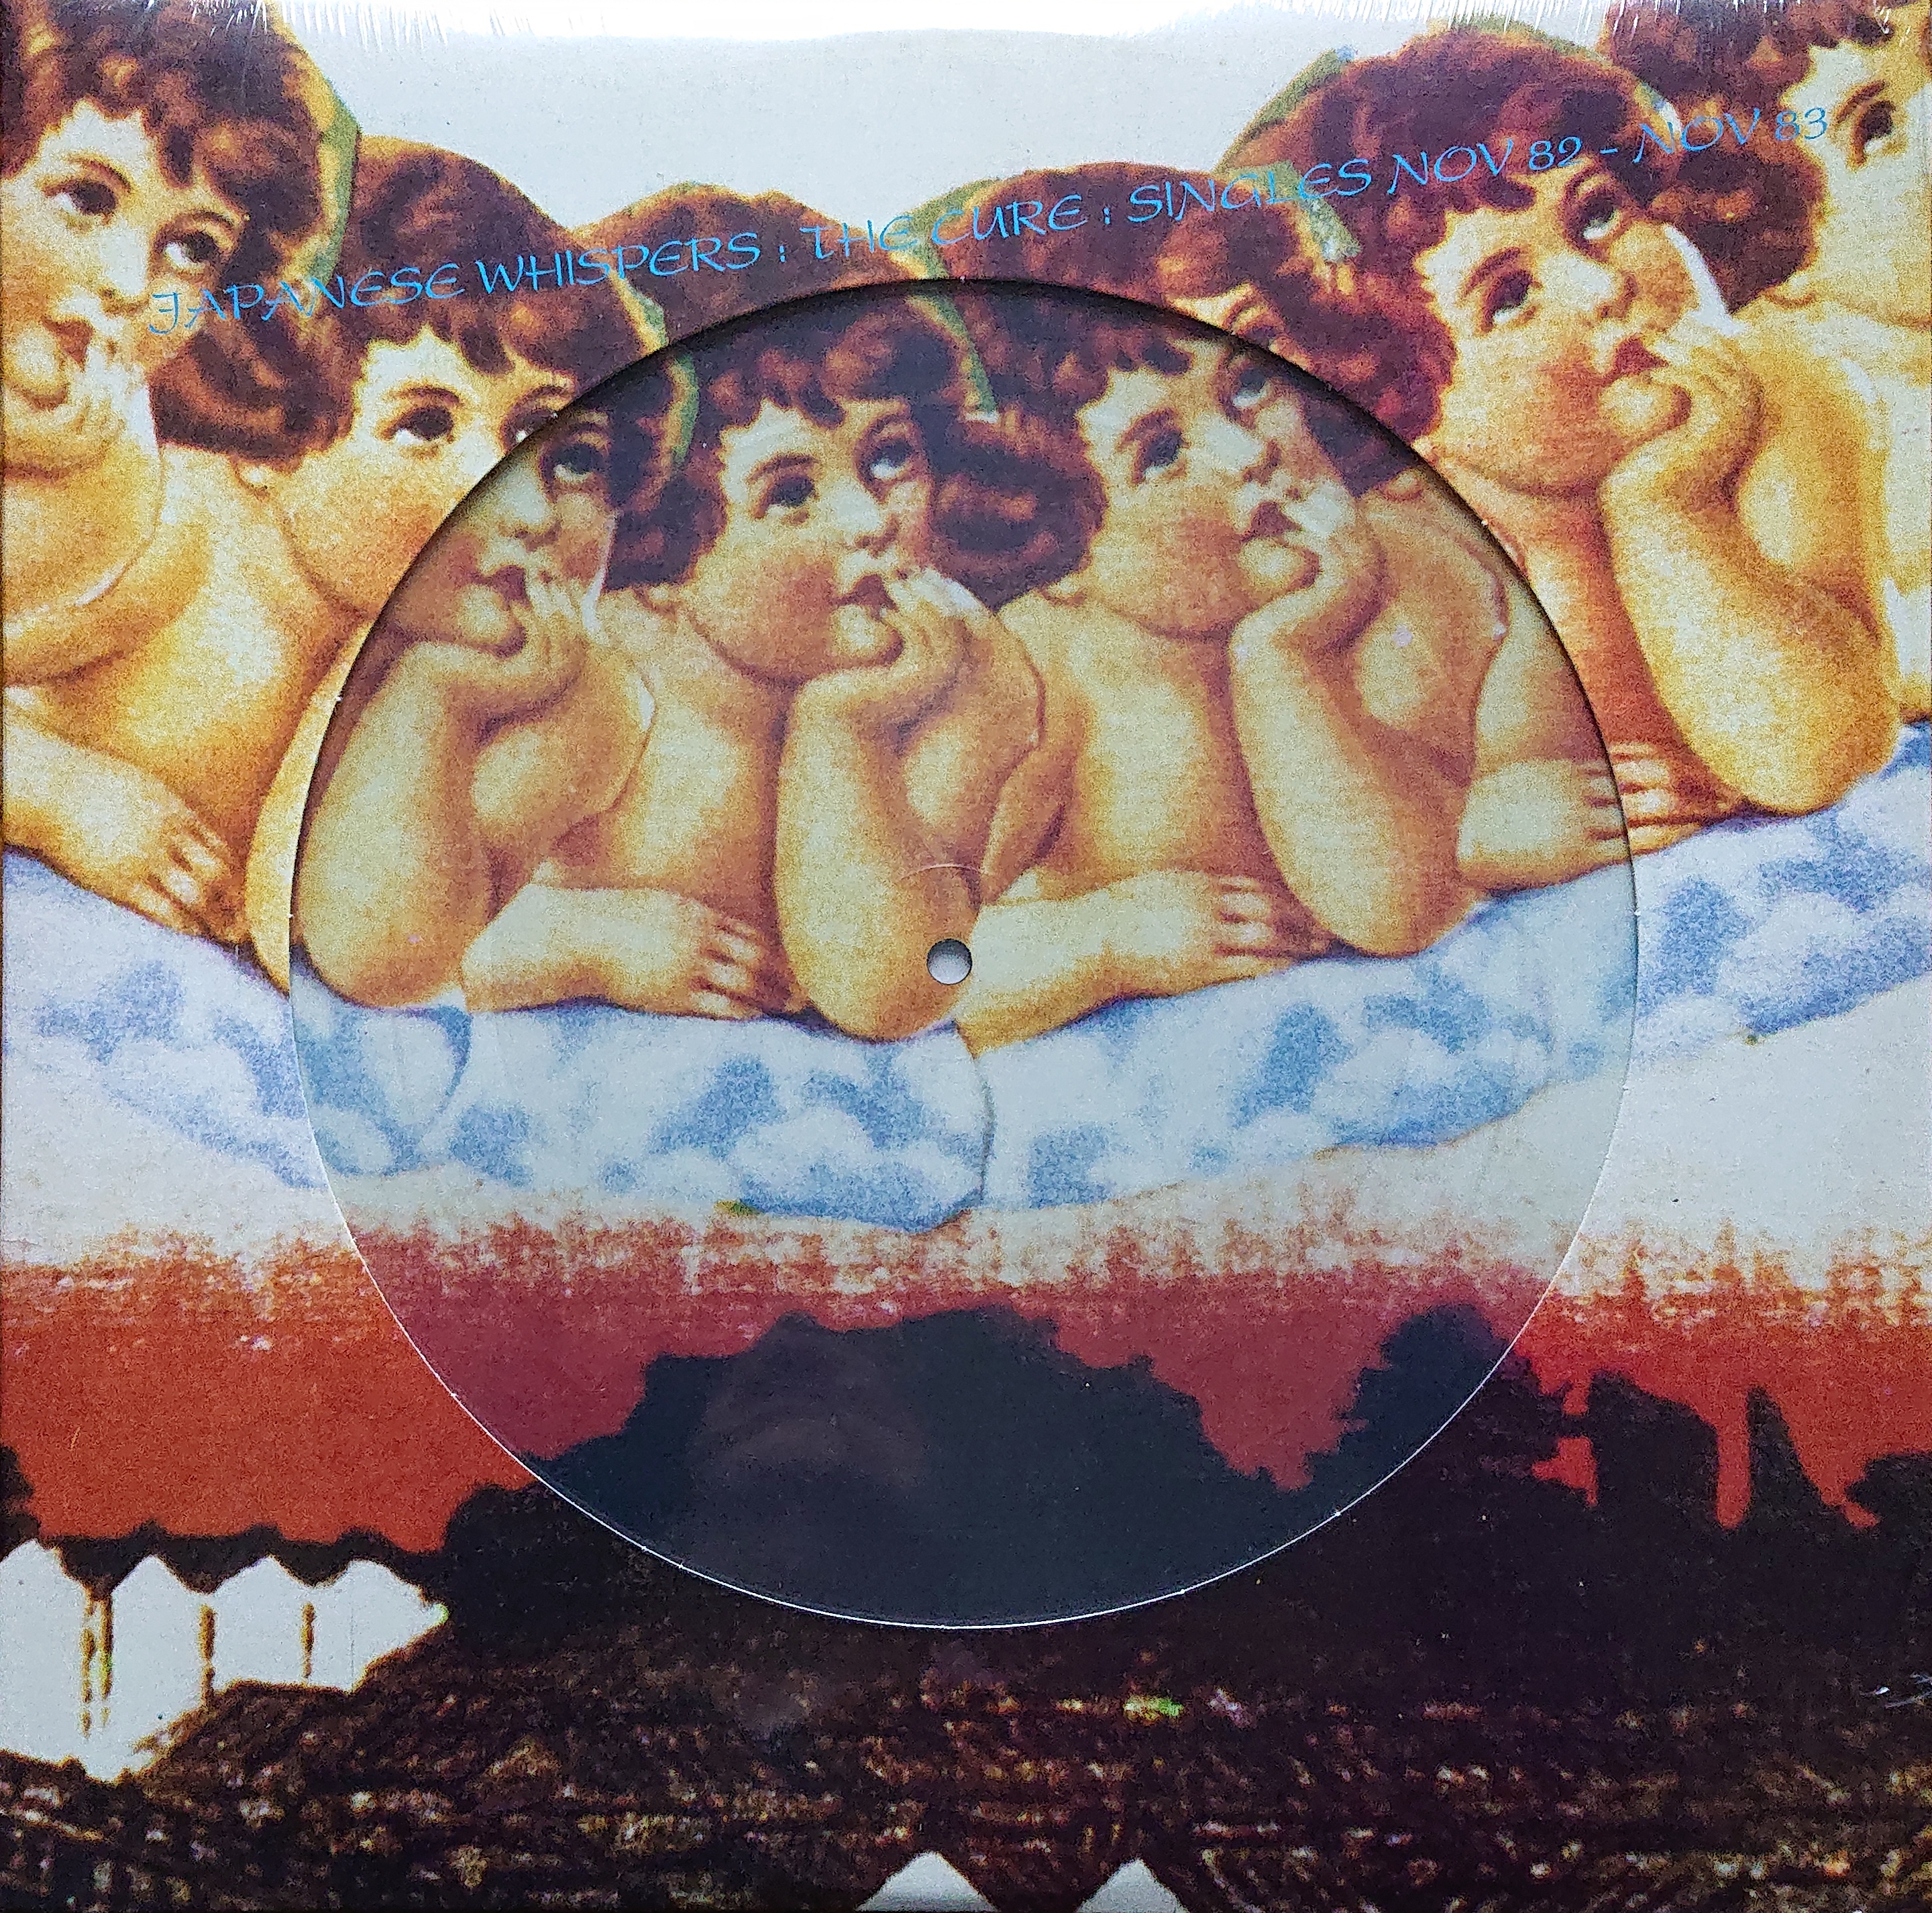 Picture of 602435081052 Japanese Whispers - Singles Nov 82 - Nov 83 by artist The Cure